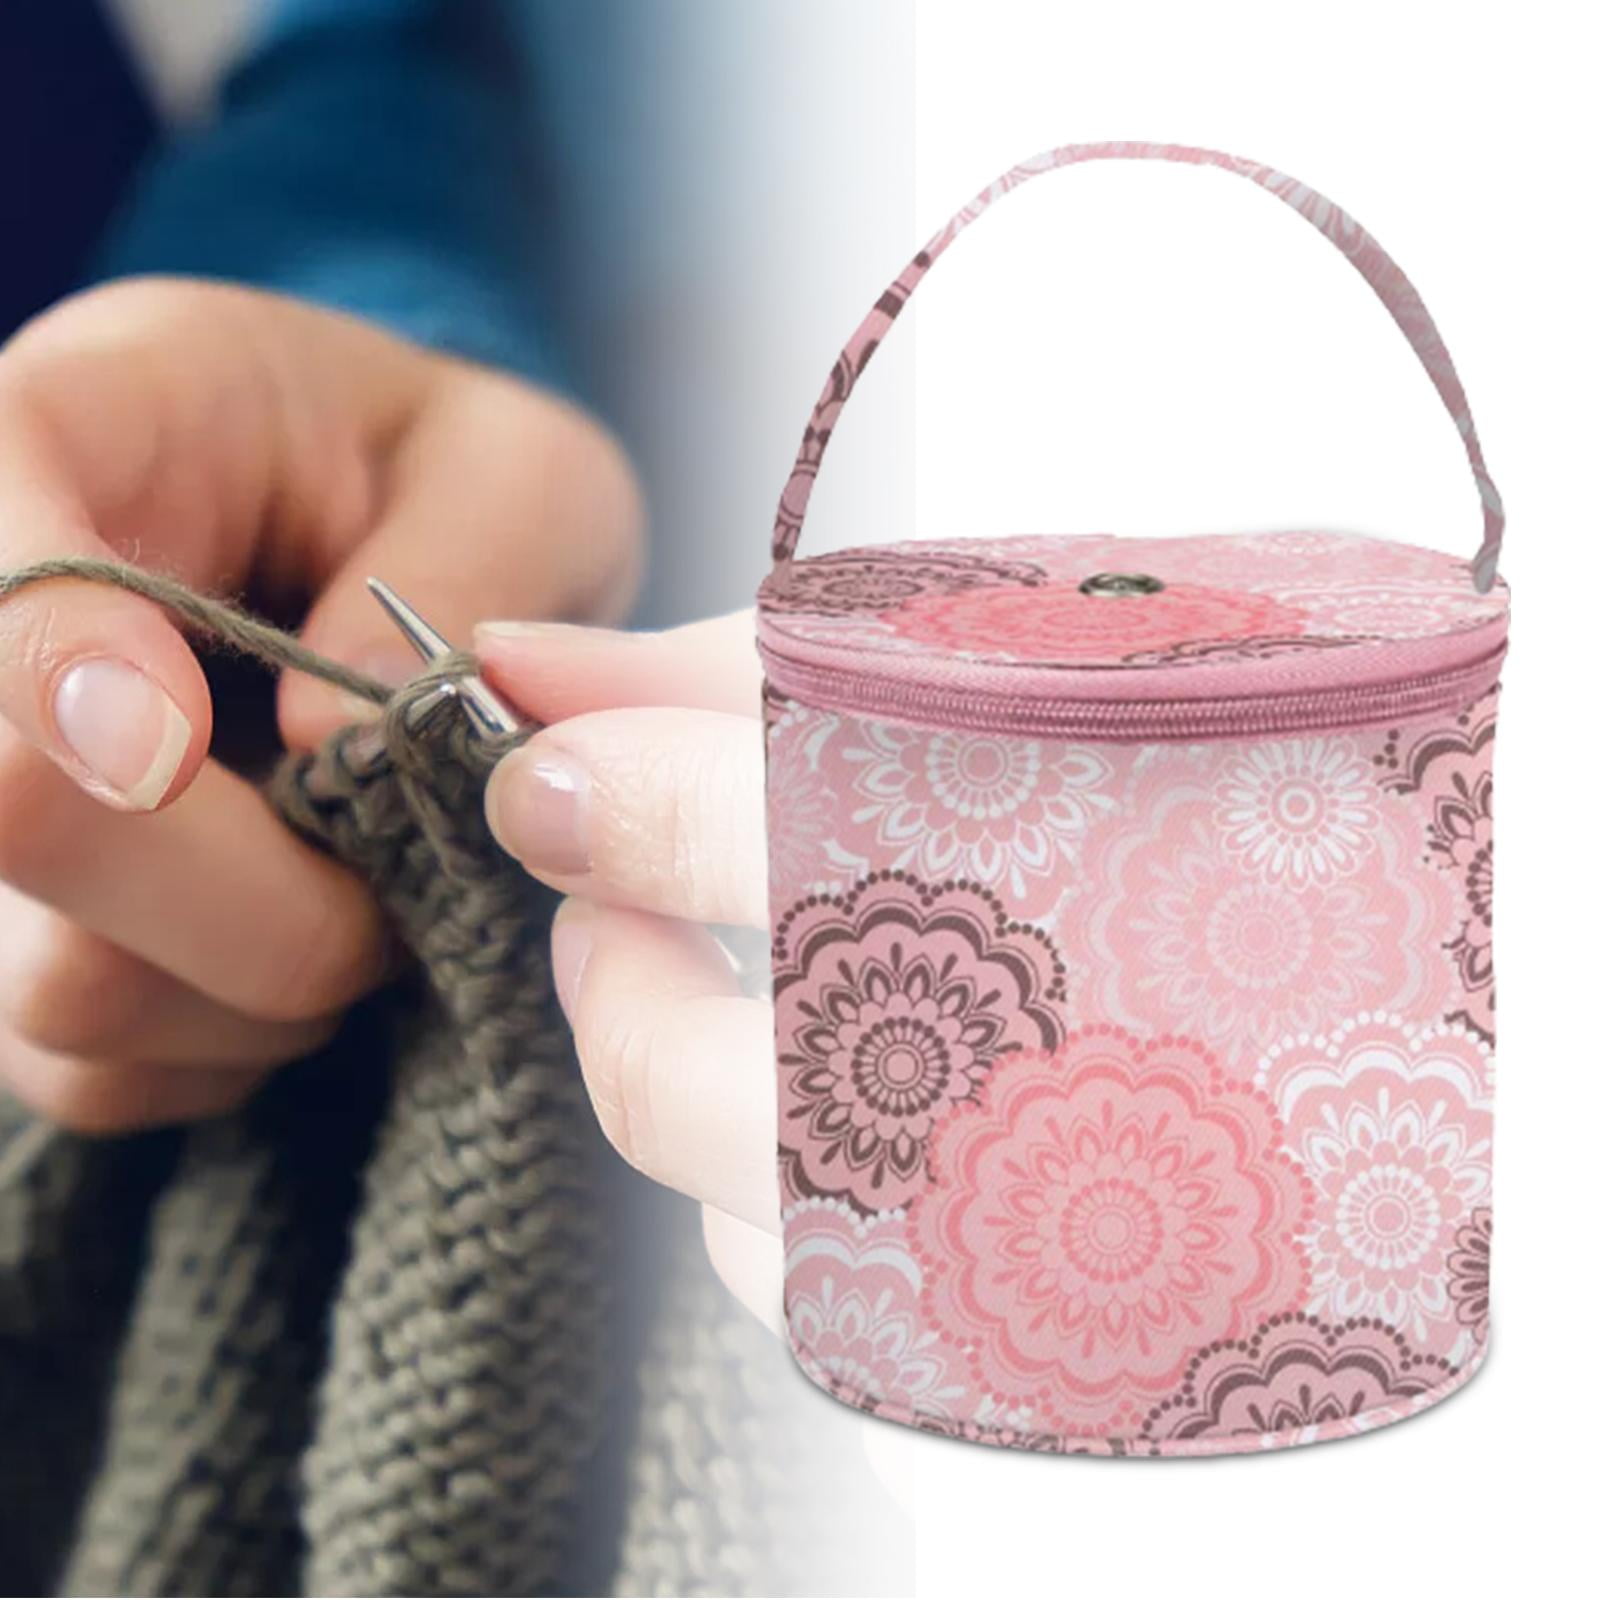 Knitting Bag Yarn Storage Tote - Craft Organizer for Balls of Yarn, Knitting  Needles, and Hooks - Project Supply Carrying Case with Pockets for Crochet  Accessories 